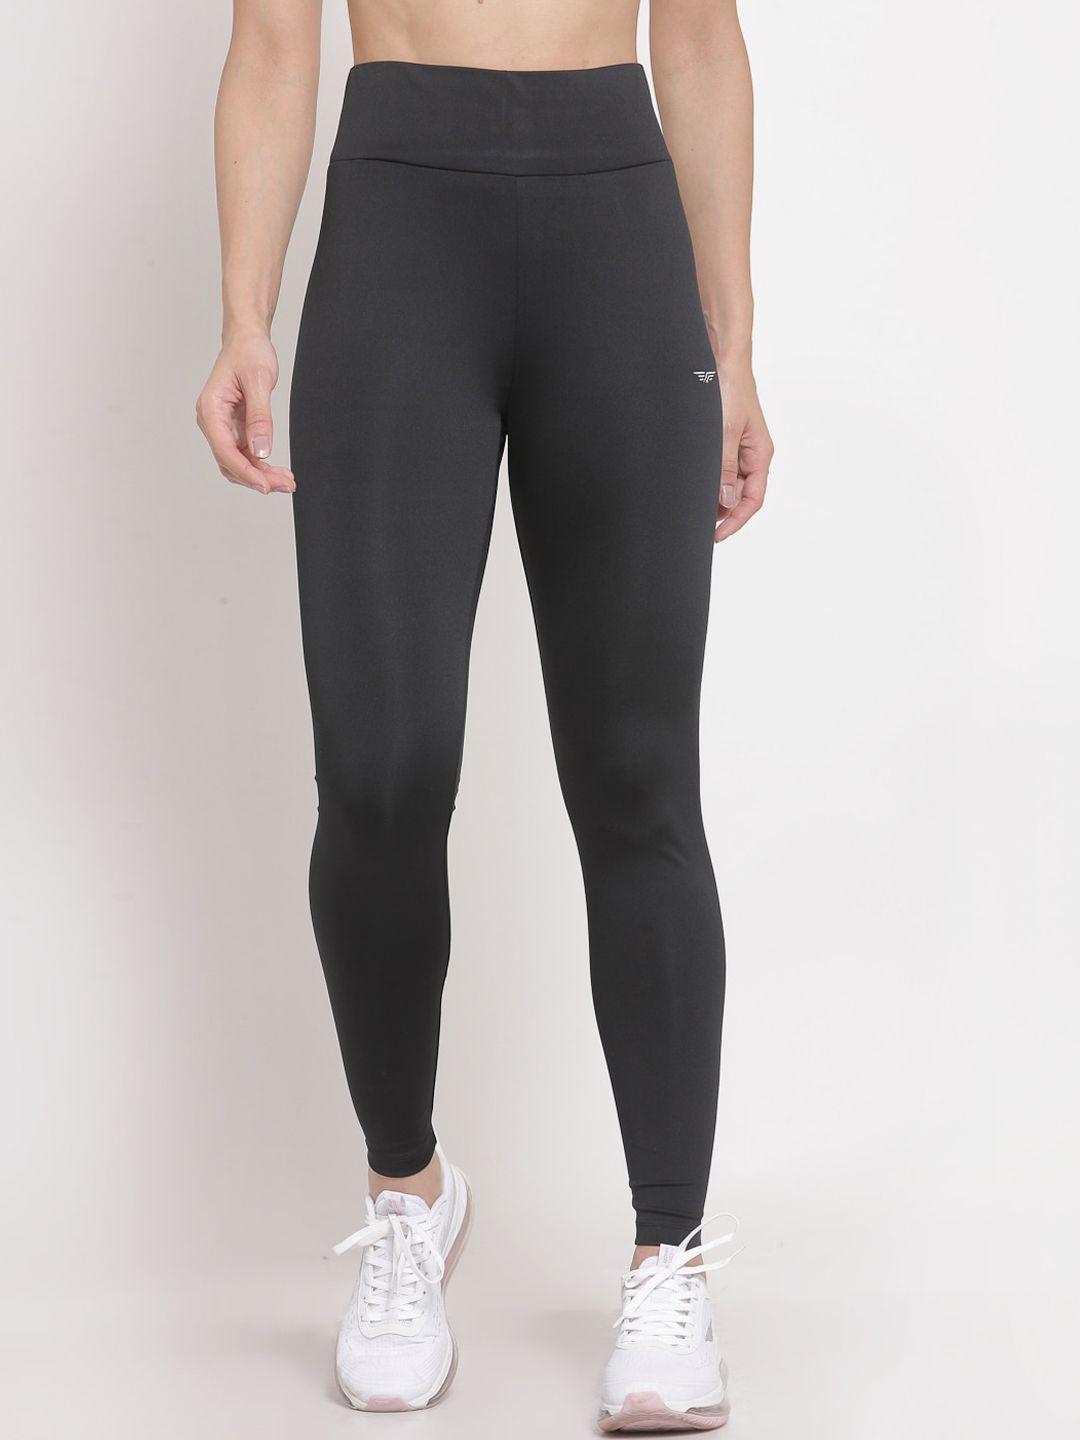 red tape women black solid sports tights